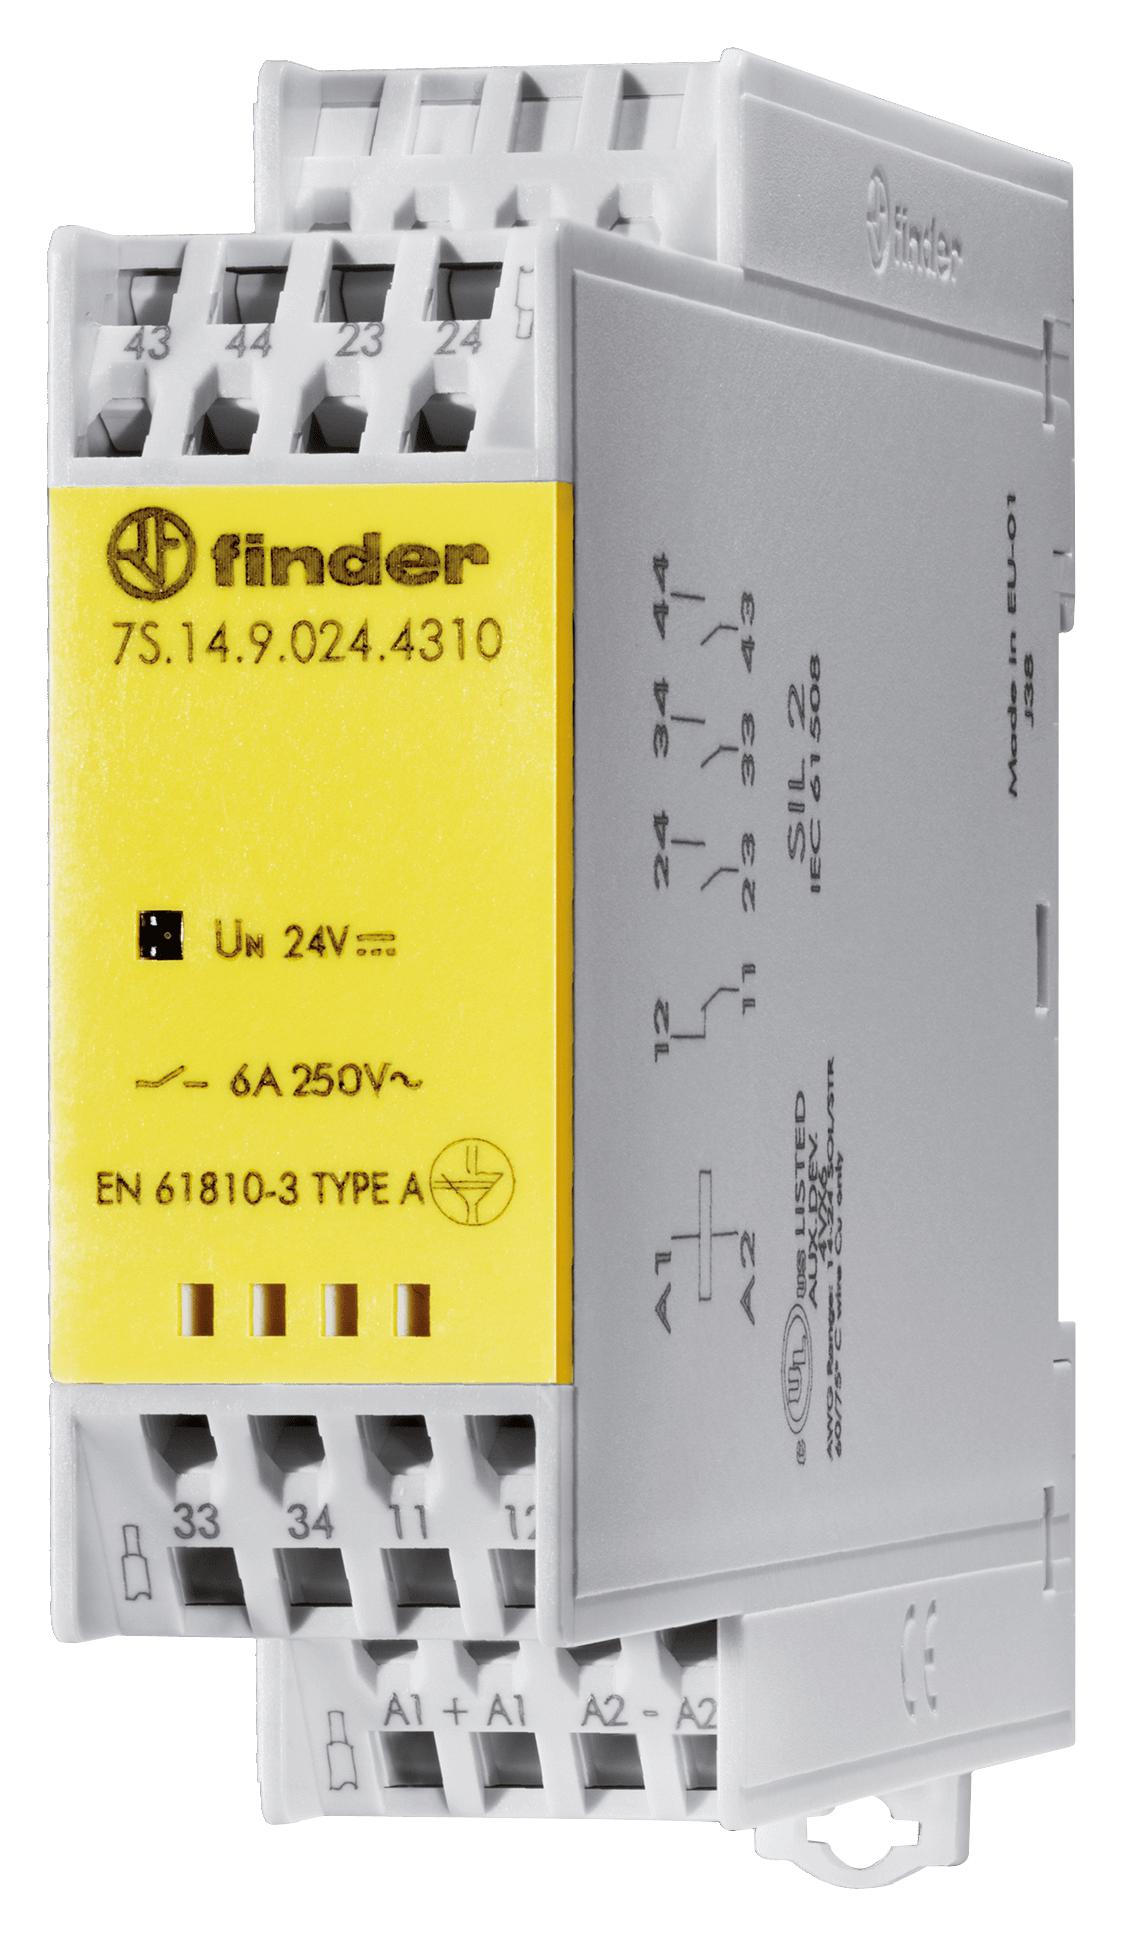 Finder Relays Relays 7S.14.9.024.4310 Safety Relay, 3No/1Nc, 6A, 250Vac